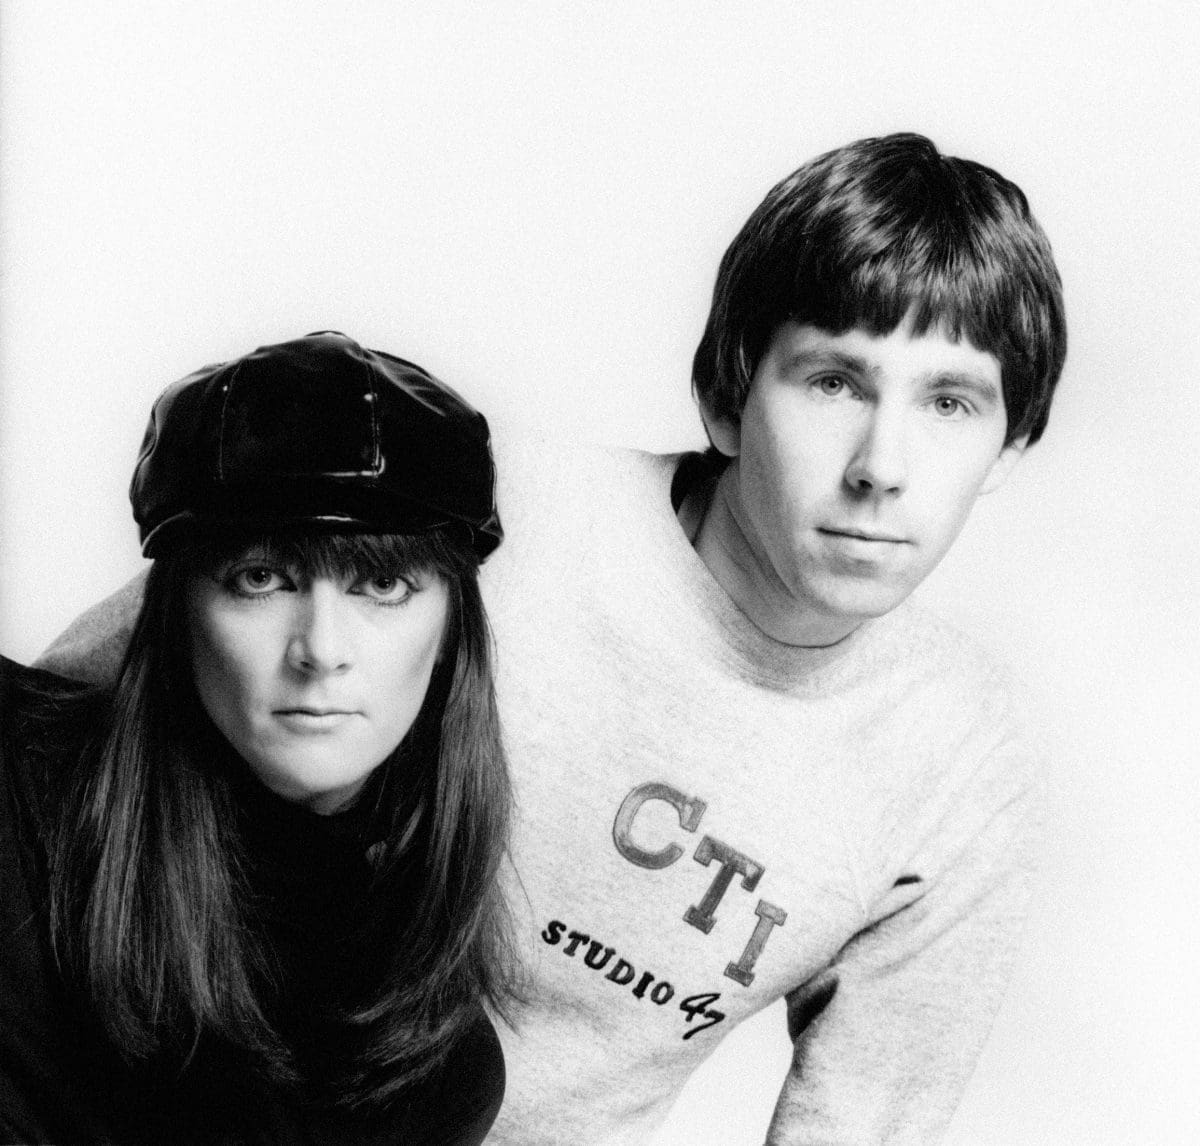 Chris & Cosey announce remastered limited edition vinyl series of 'Elemental 7' (1984), 'Muzik Fantastique!' (1993) and 'Feral Vapours Of The Silver Ether' (2007)